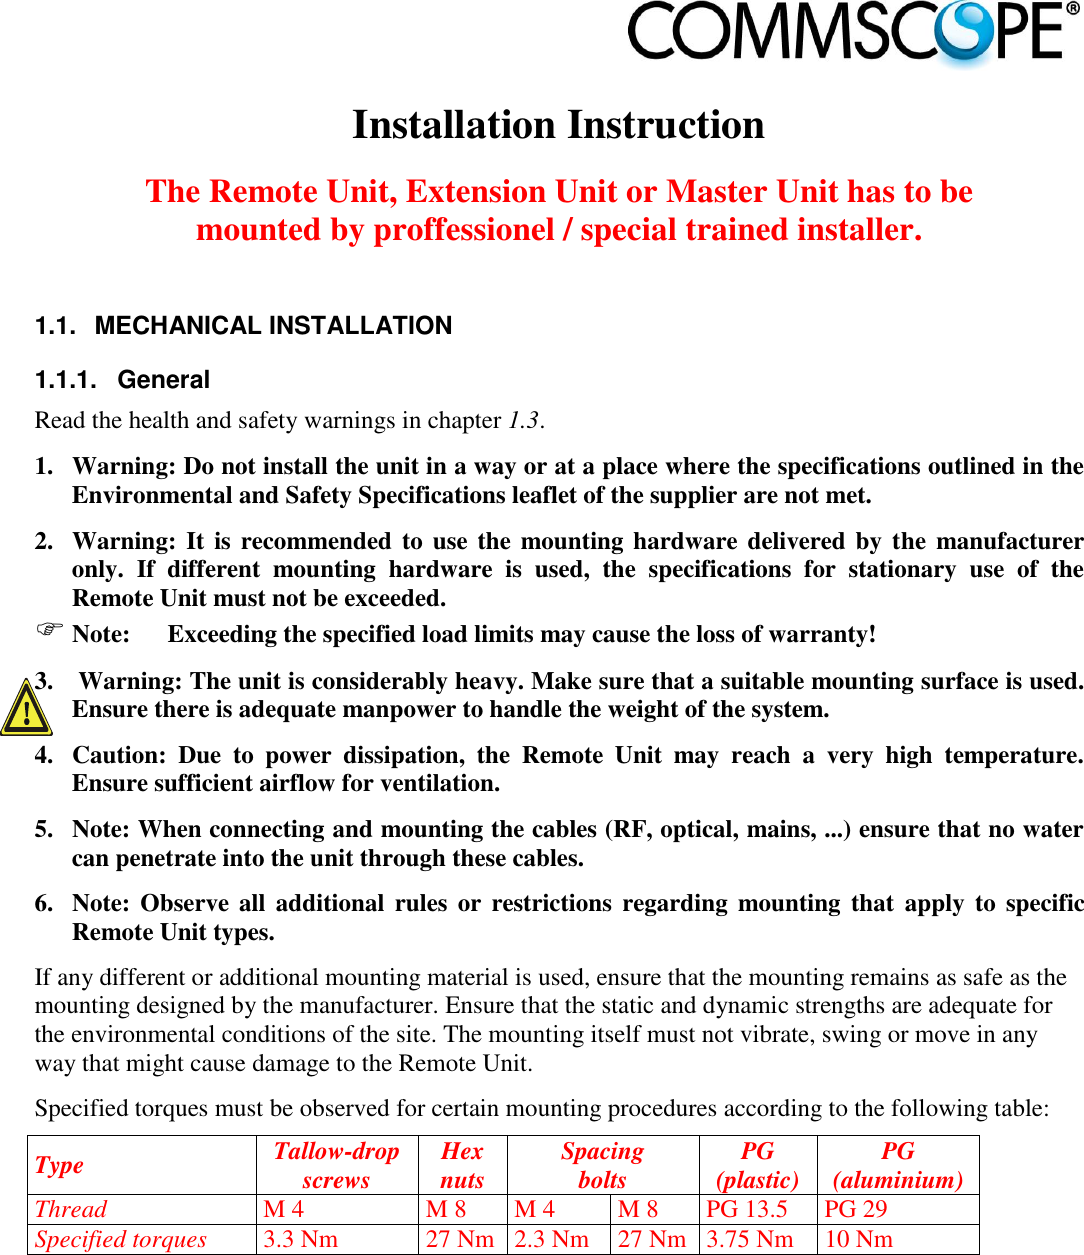                             Installation Instruction  The Remote Unit, Extension Unit or Master Unit has to be mounted by proffessionel / special trained installer.  1.1.  MECHANICAL INSTALLATION 1.1.1.  General Read the health and safety warnings in chapter 1.3. 1. Warning: Do not install the unit in a way or at a place where the specifications outlined in the Environmental and Safety Specifications leaflet of the supplier are not met. 2. Warning: It is recommended to use the mounting hardware delivered by the  manufacturer only.  If  different  mounting  hardware  is  used,  the  specifications  for  stationary  use  of  the Remote Unit must not be exceeded.  Note:  Exceeding the specified load limits may cause the loss of warranty! 3.  Warning: The unit is considerably heavy. Make sure that a suitable mounting surface is used. Ensure there is adequate manpower to handle the weight of the system. 4. Caution:  Due  to  power  dissipation,  the  Remote  Unit  may  reach  a  very  high  temperature. Ensure sufficient airflow for ventilation. 5. Note: When connecting and mounting the cables (RF, optical, mains, ...) ensure that no water can penetrate into the unit through these cables. 6. Note: Observe all  additional  rules  or  restrictions  regarding  mounting  that  apply  to  specific Remote Unit types. If any different or additional mounting material is used, ensure that the mounting remains as safe as the mounting designed by the manufacturer. Ensure that the static and dynamic strengths are adequate for the environmental conditions of the site. The mounting itself must not vibrate, swing or move in any way that might cause damage to the Remote Unit. Specified torques must be observed for certain mounting procedures according to the following table: Type Tallow-drop screws Hex nuts Spacing bolts PG (plastic) PG (aluminium) Thread M 4 M 8 M 4 M 8 PG 13.5 PG 29 Specified torques 3.3 Nm 27 Nm 2.3 Nm 27 Nm 3.75 Nm 10 Nm 